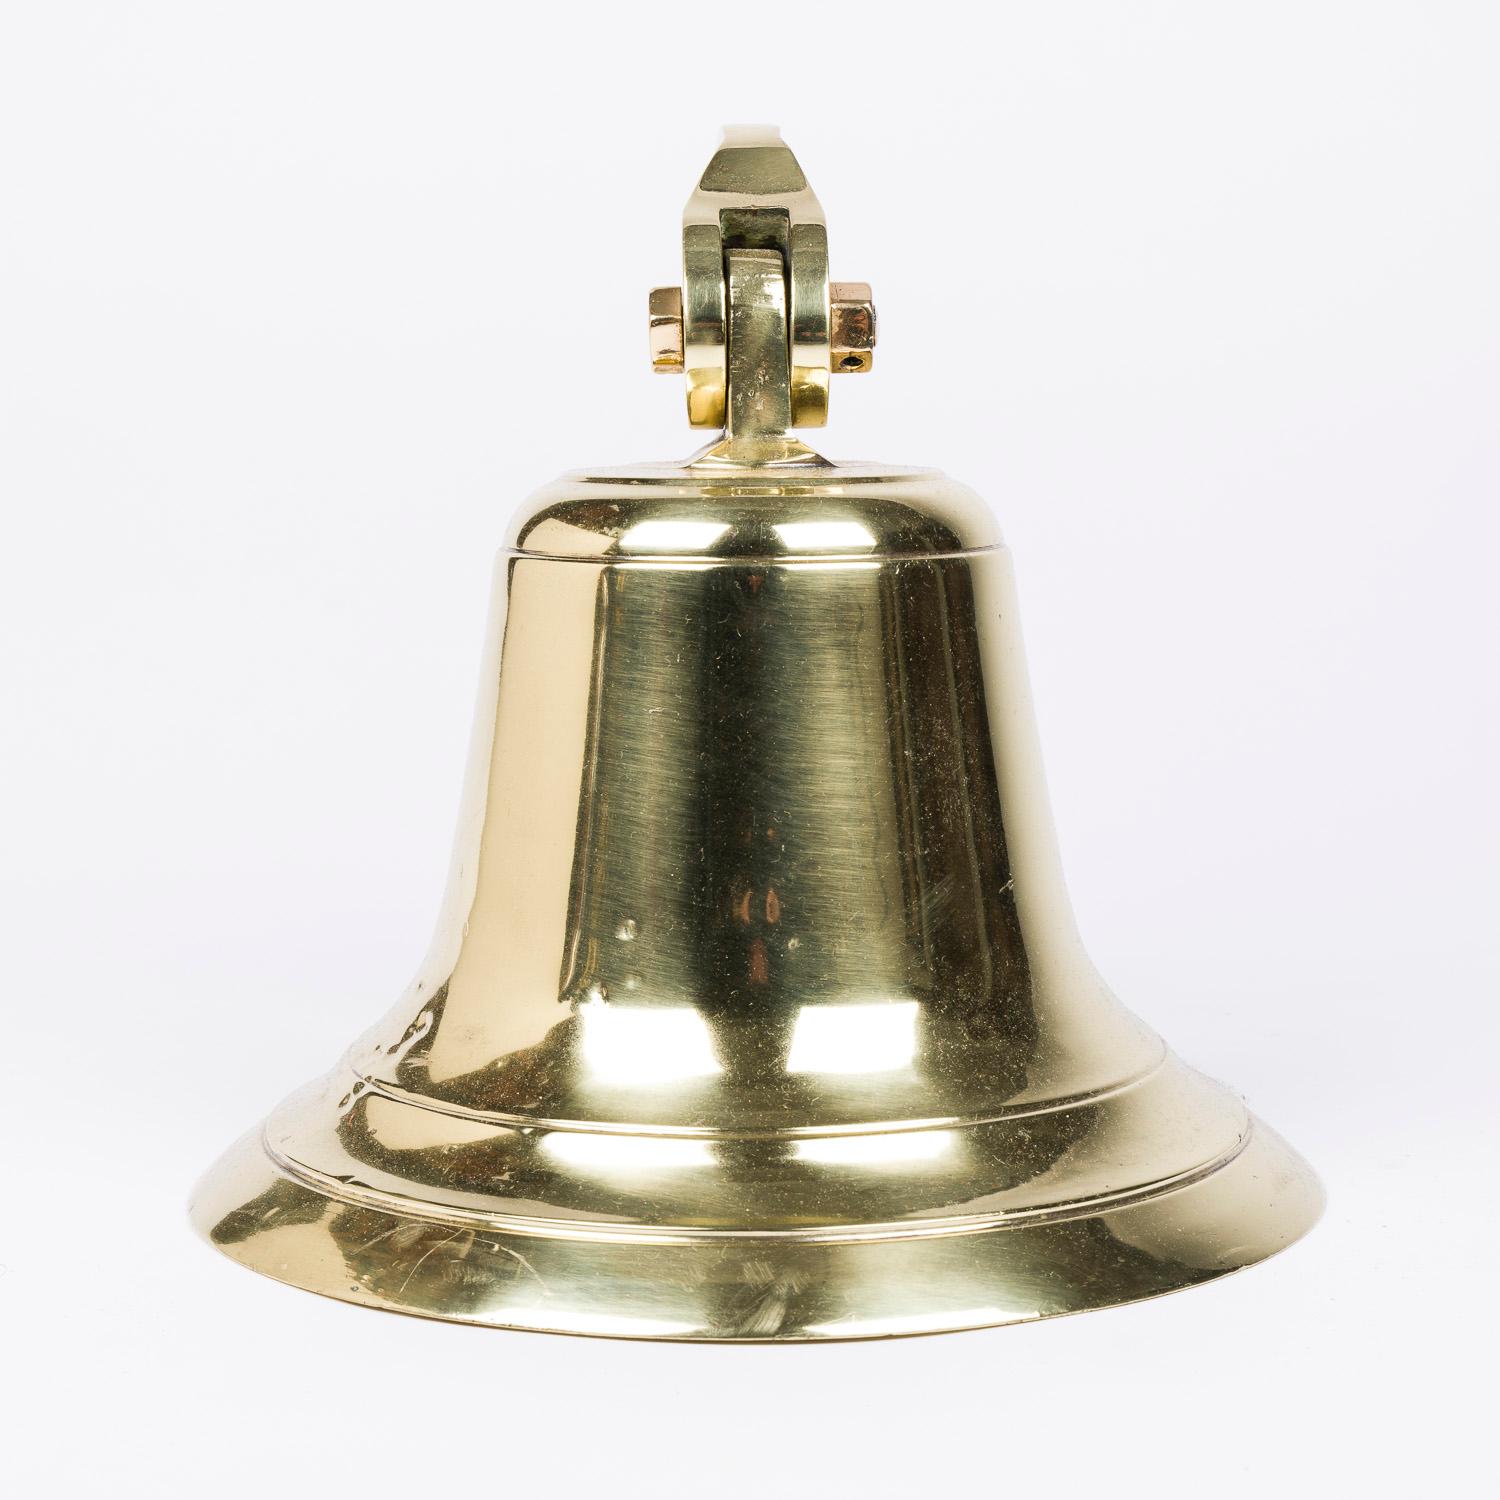 An early 20th century wall mounted bell, with brass bracket.

Projection from wall: 15 inches.

Original iron ball clapper.

The bell has a nice ring and good resonance.

